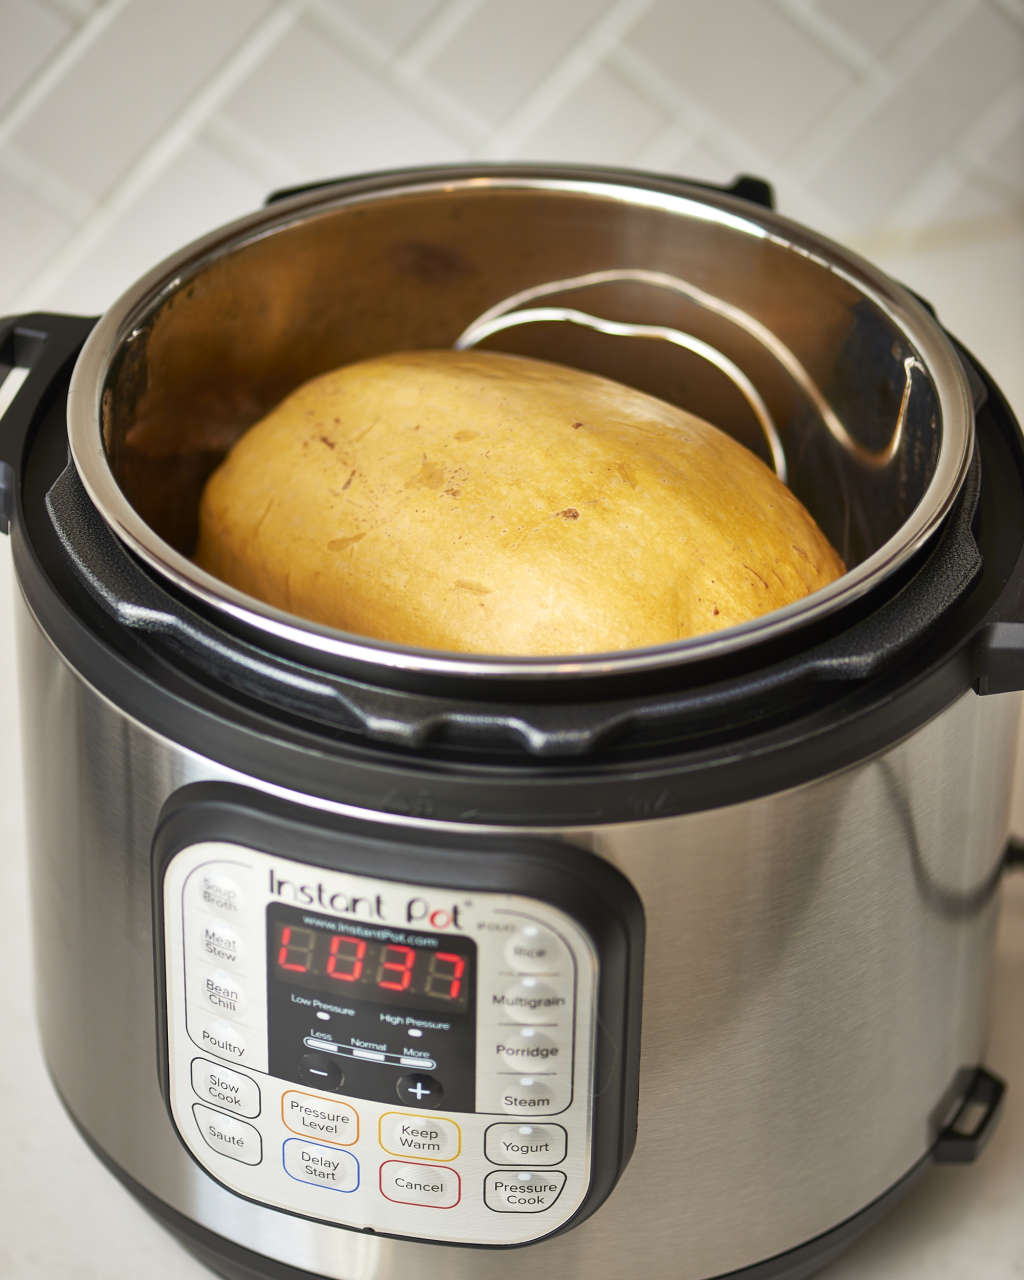 How To Cook Spaghetti Squash in an Electric Pressure Cooker | Kitchn